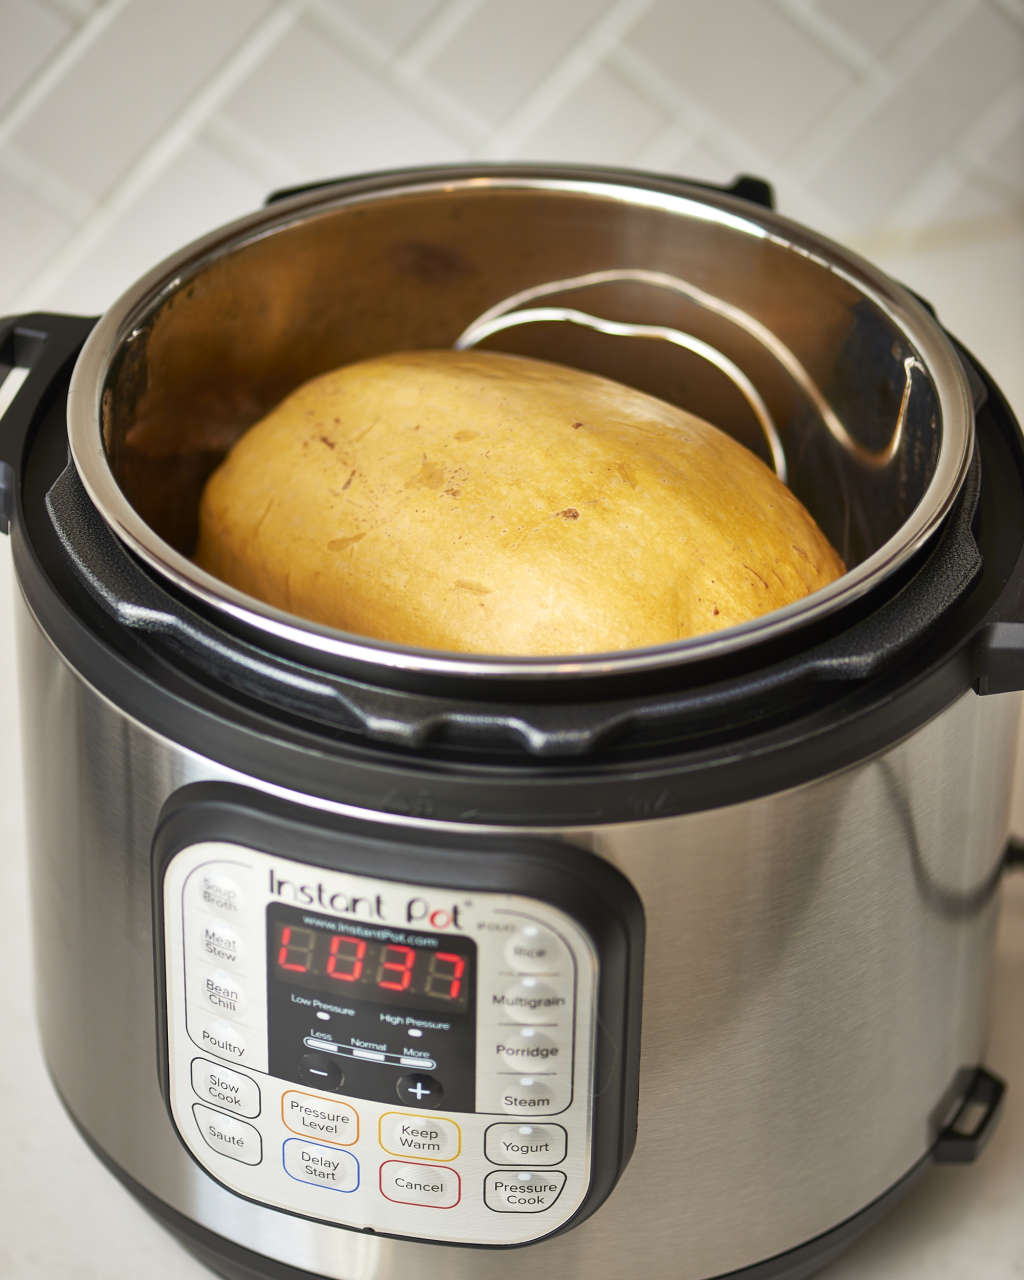 How To Cook Spaghetti Squash in an Electric Pressure Cooker | Kitchn